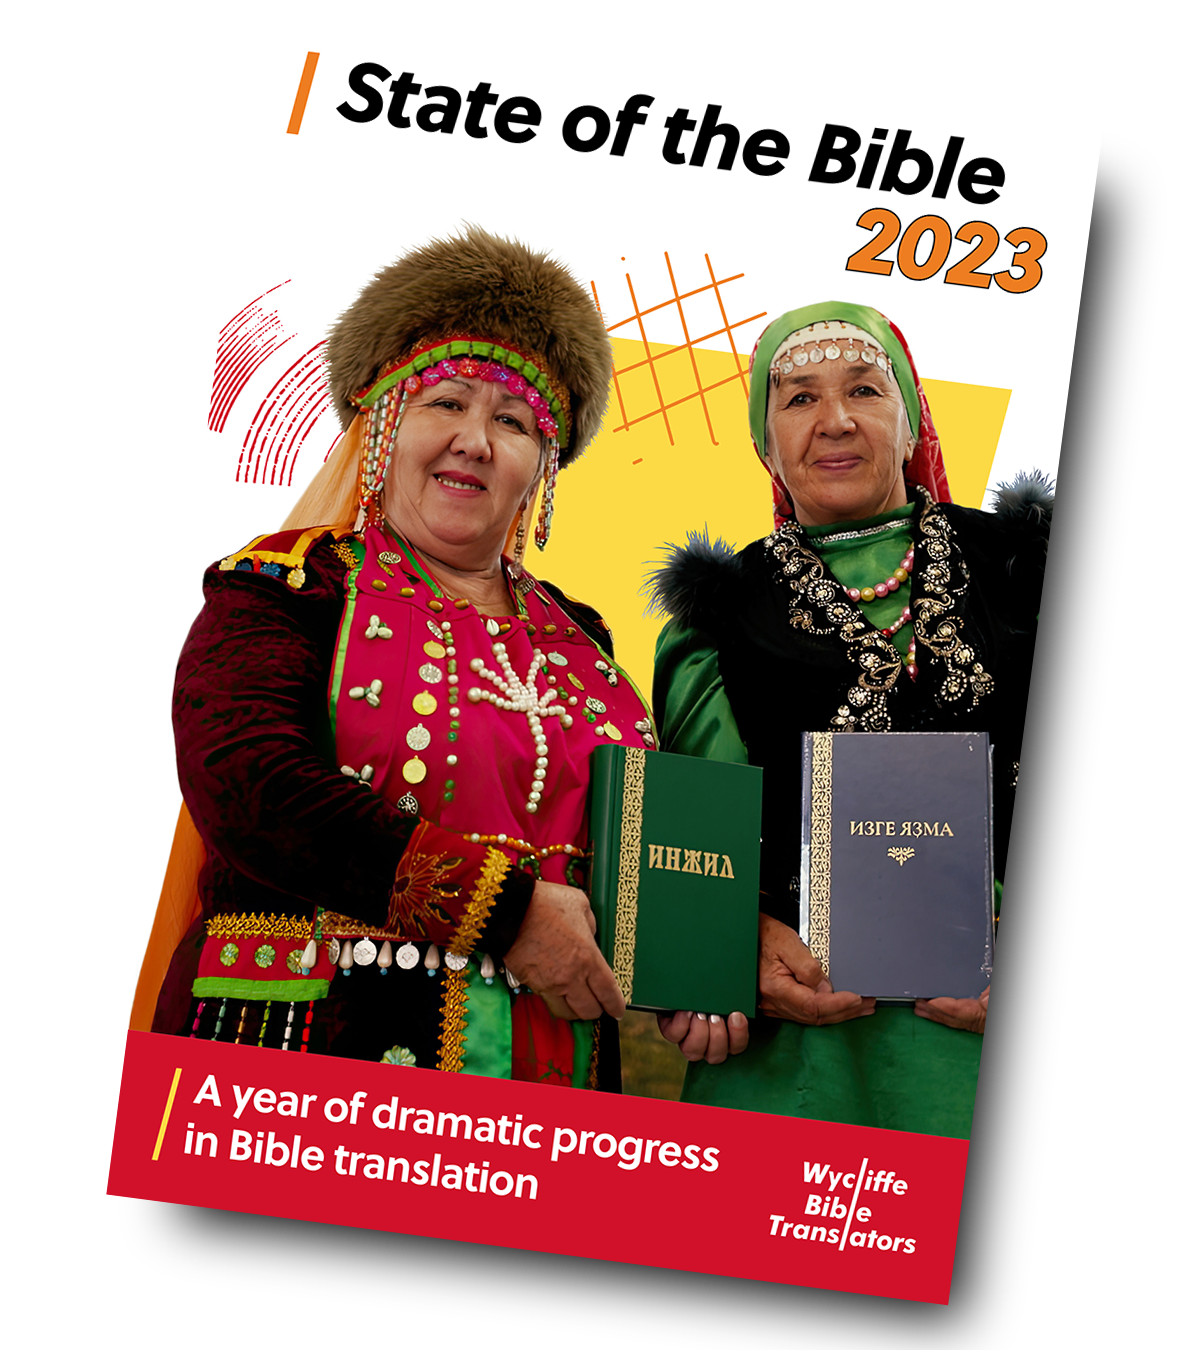 Image of the front cover of the State of the Bible 2023 report